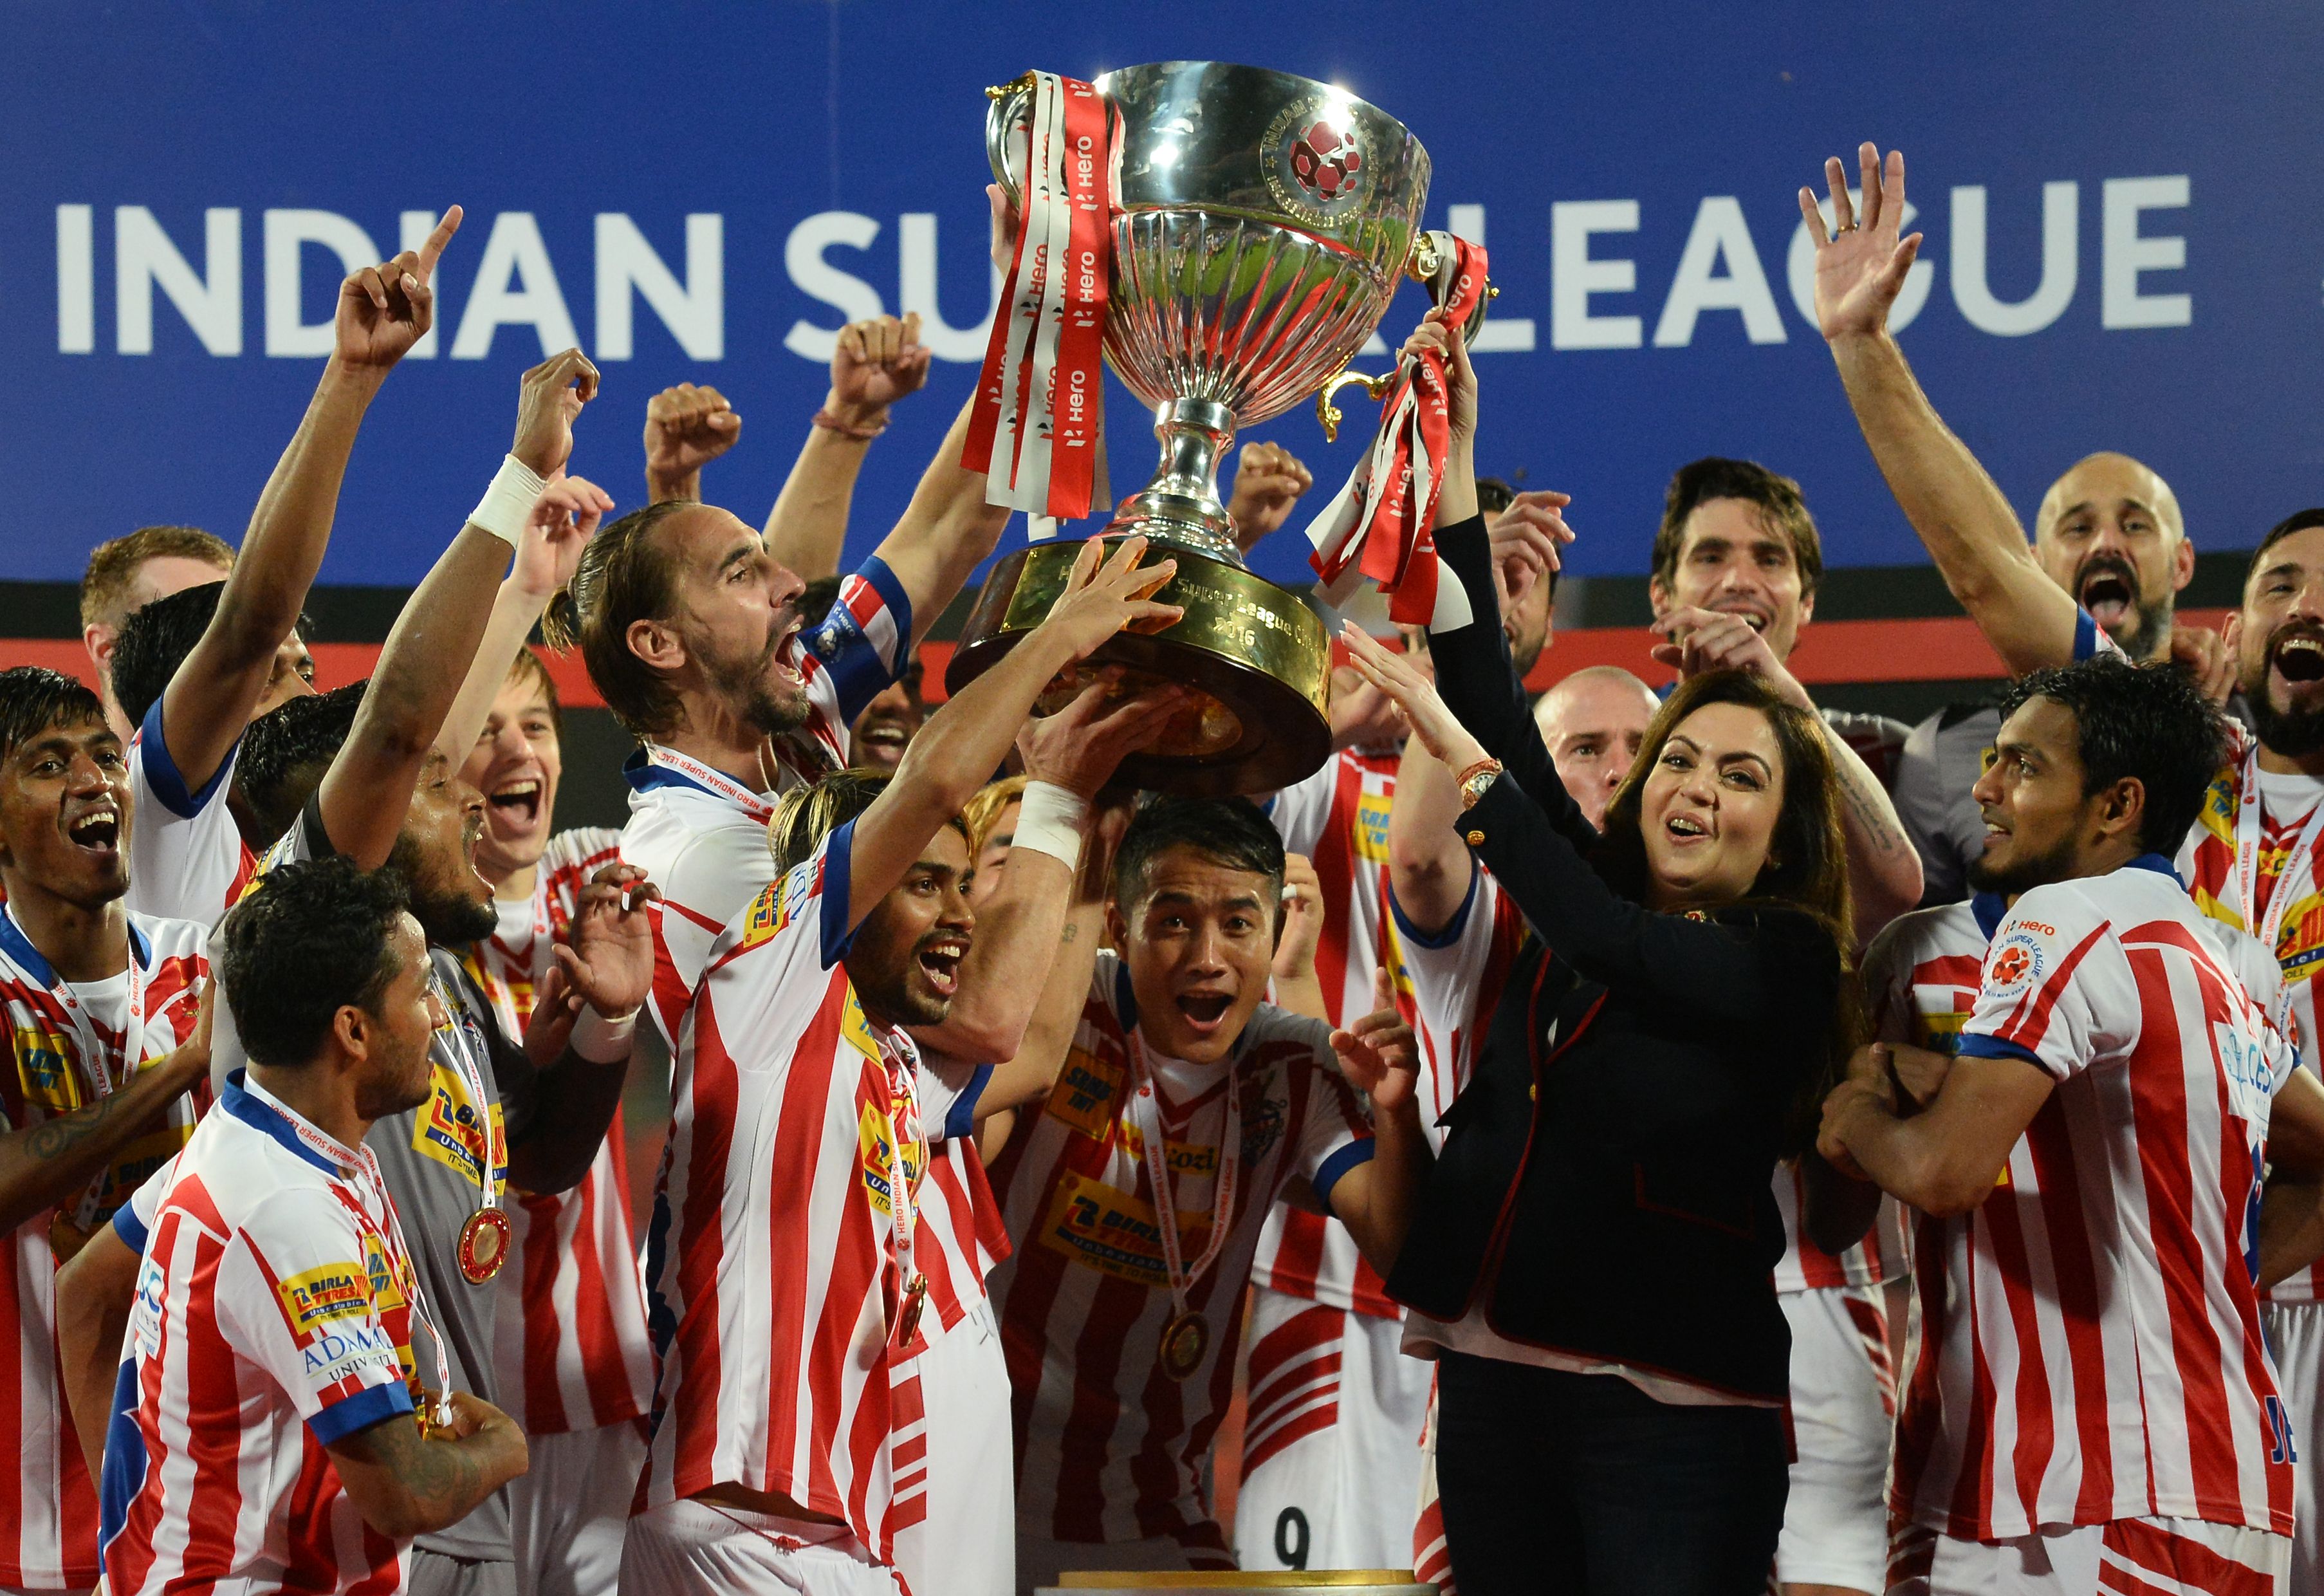 Atletico de Kolkata players celebrate with the trophy, presented by Indian Super League (ISL) director Nita Ambani (3rd R), after winning the ISL final football match against Kerala Blasters FC at the Jawahar Lal Nehru Stadium in Kochi on December 18, 2016. ----IMAGE RESTRICTED TO EDITORIAL USE - STRICTLY NO COMMERCIAL USE-----  / AFP / SAJJAD HUSSAIN        (Photo credit should read SAJJAD HUSSAIN/AFP/Getty Images)